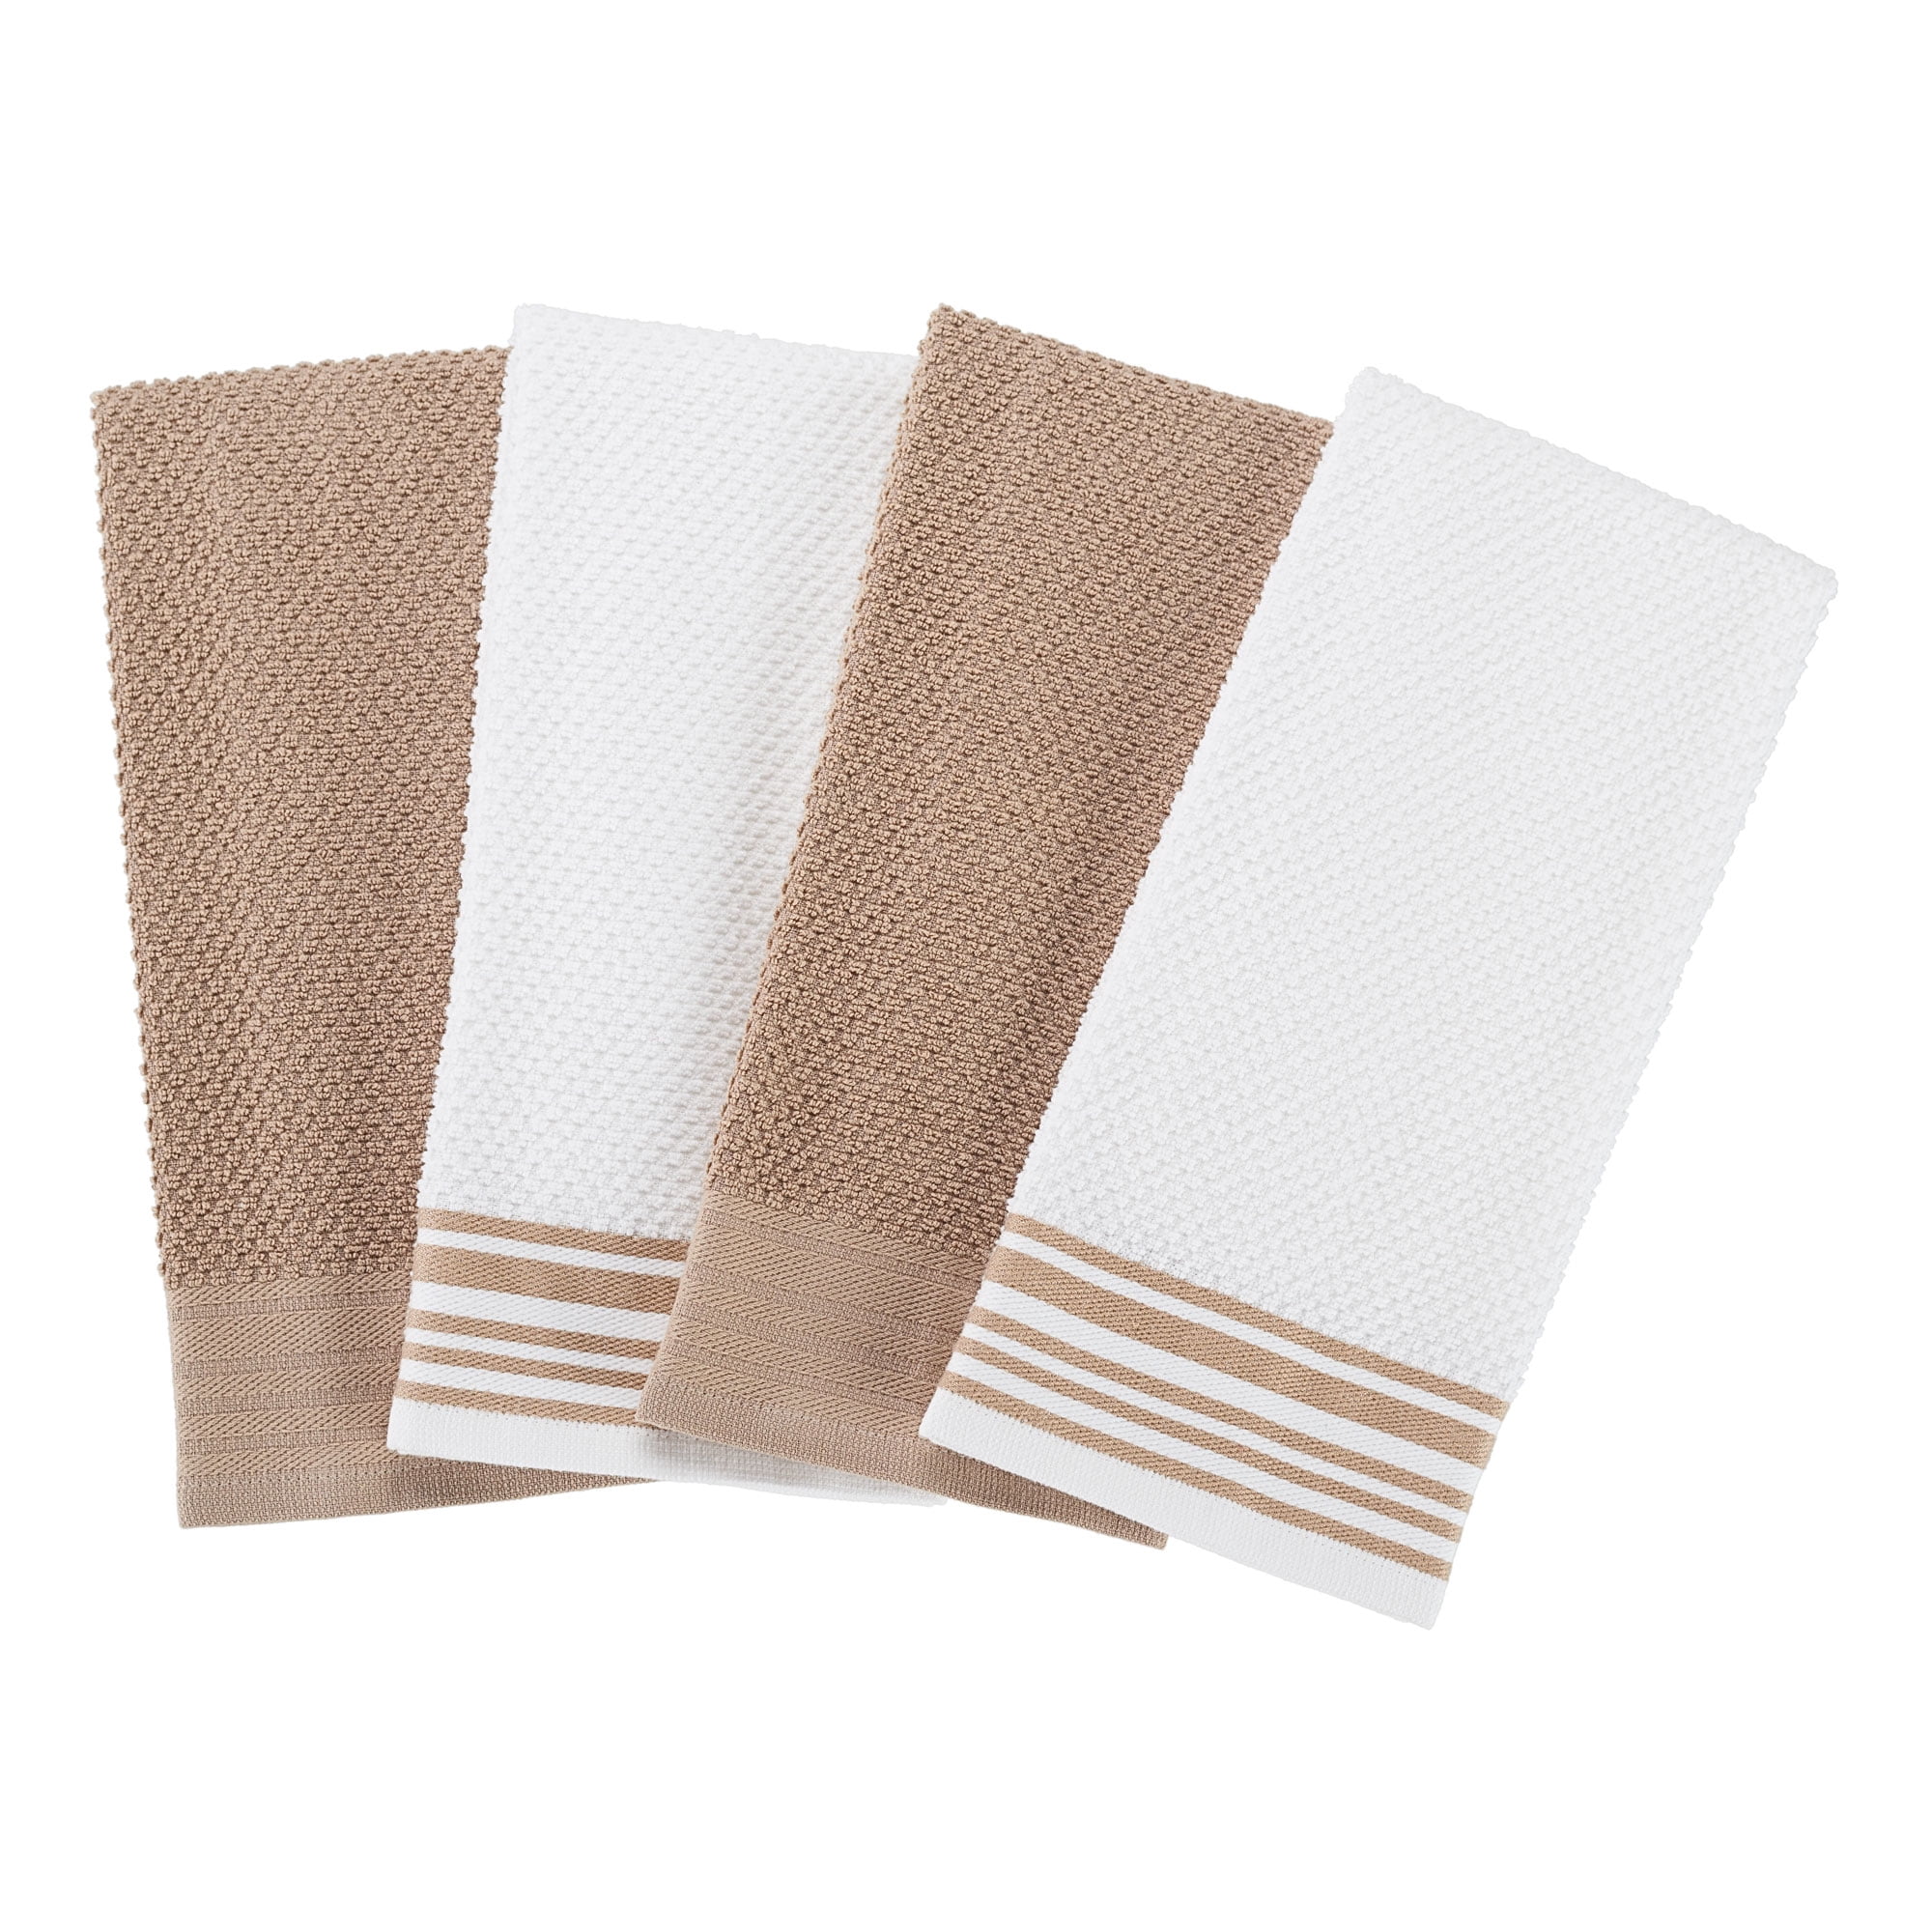 Mainstays 4-Pack 16x26 Woven Kitchen Towel Set, Brownstone